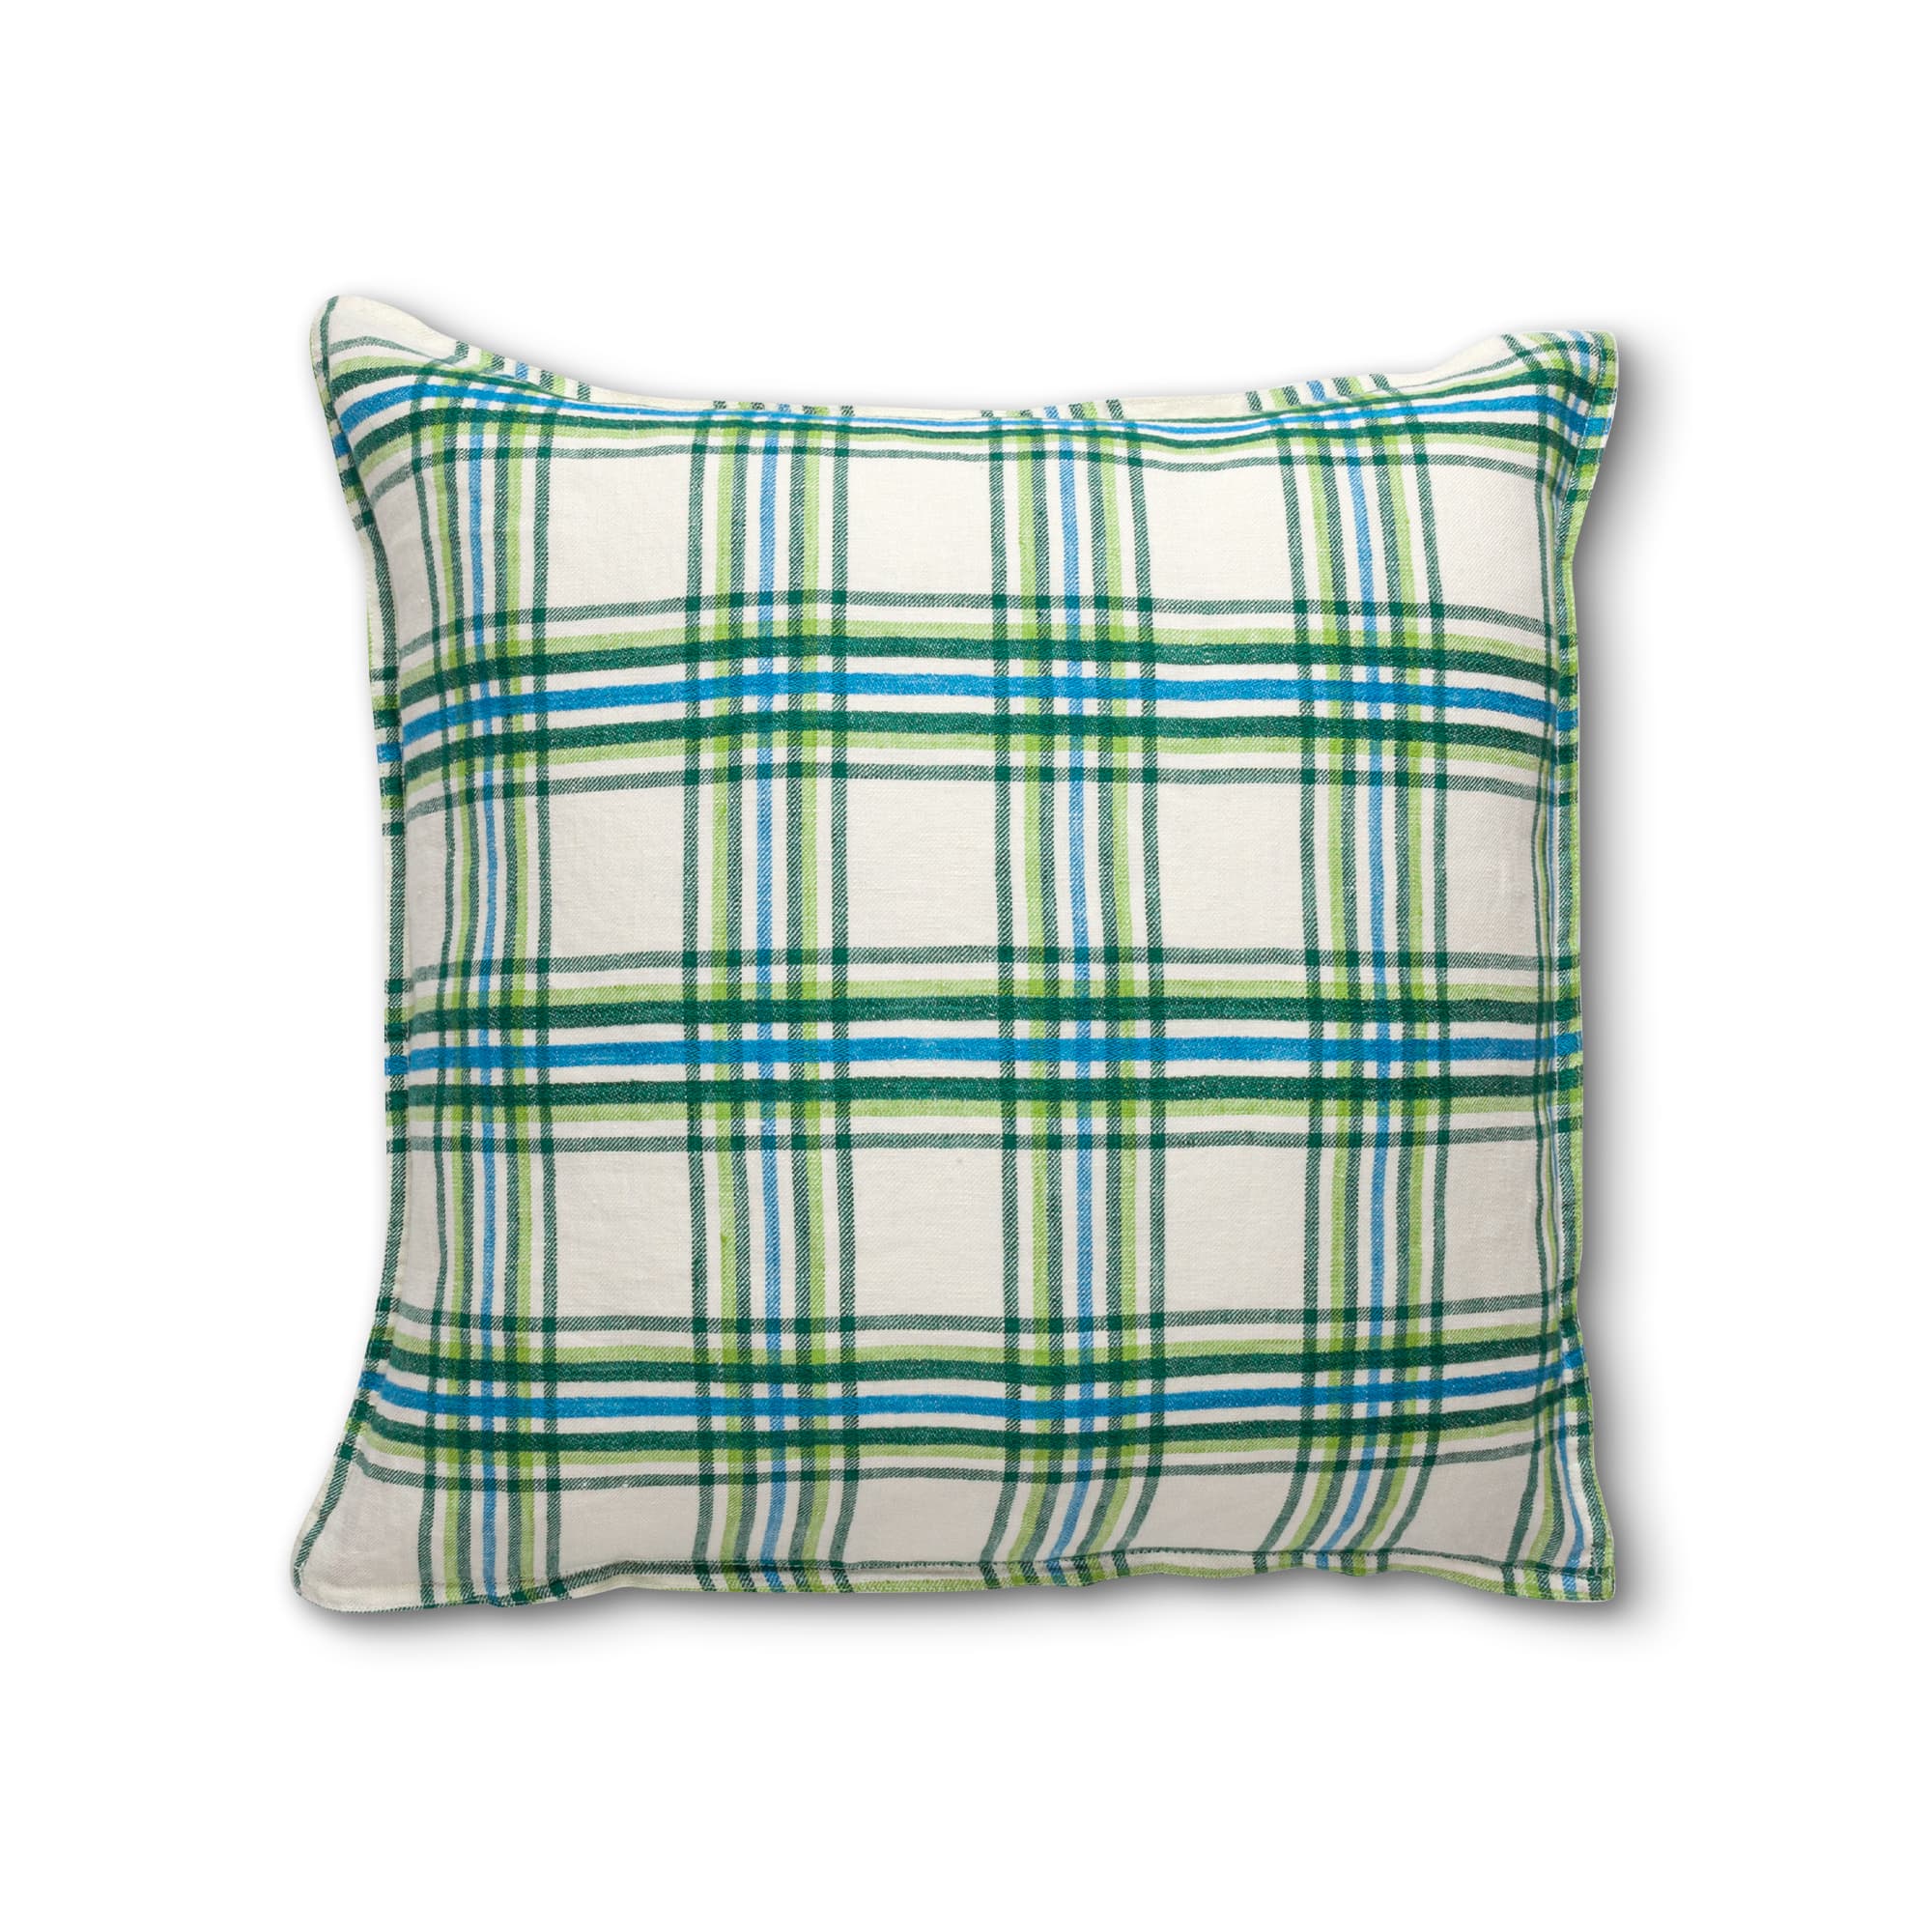 Prewashed Linen Cushion Cover with Green Plaid